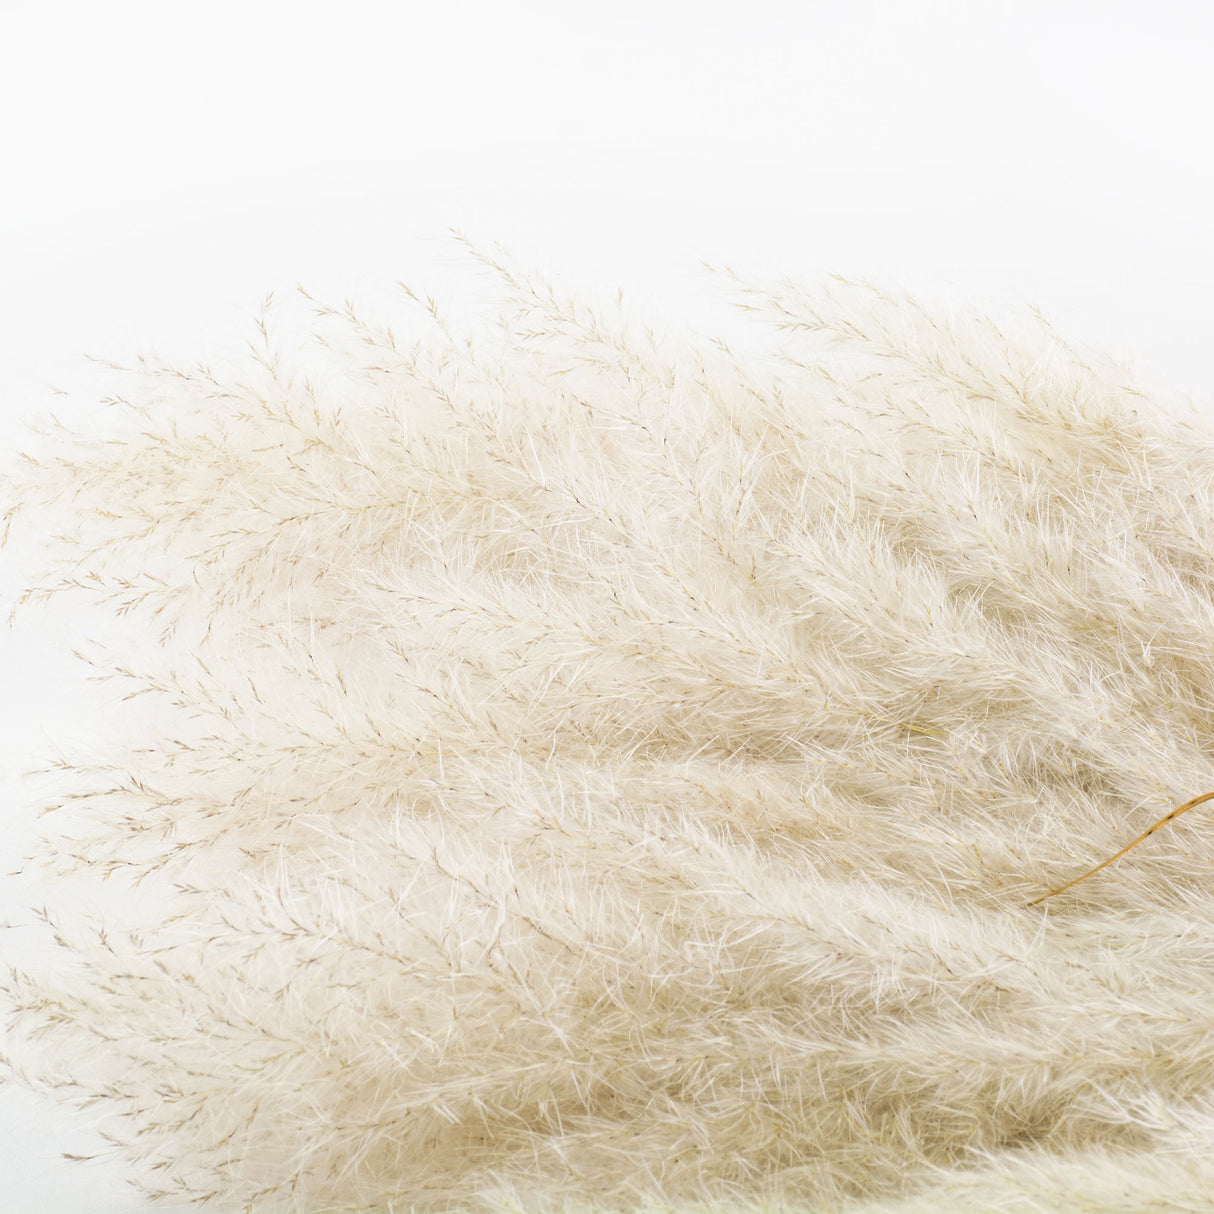 A close up of the plumes belonging to a bunch of fluffy, natural white pampas